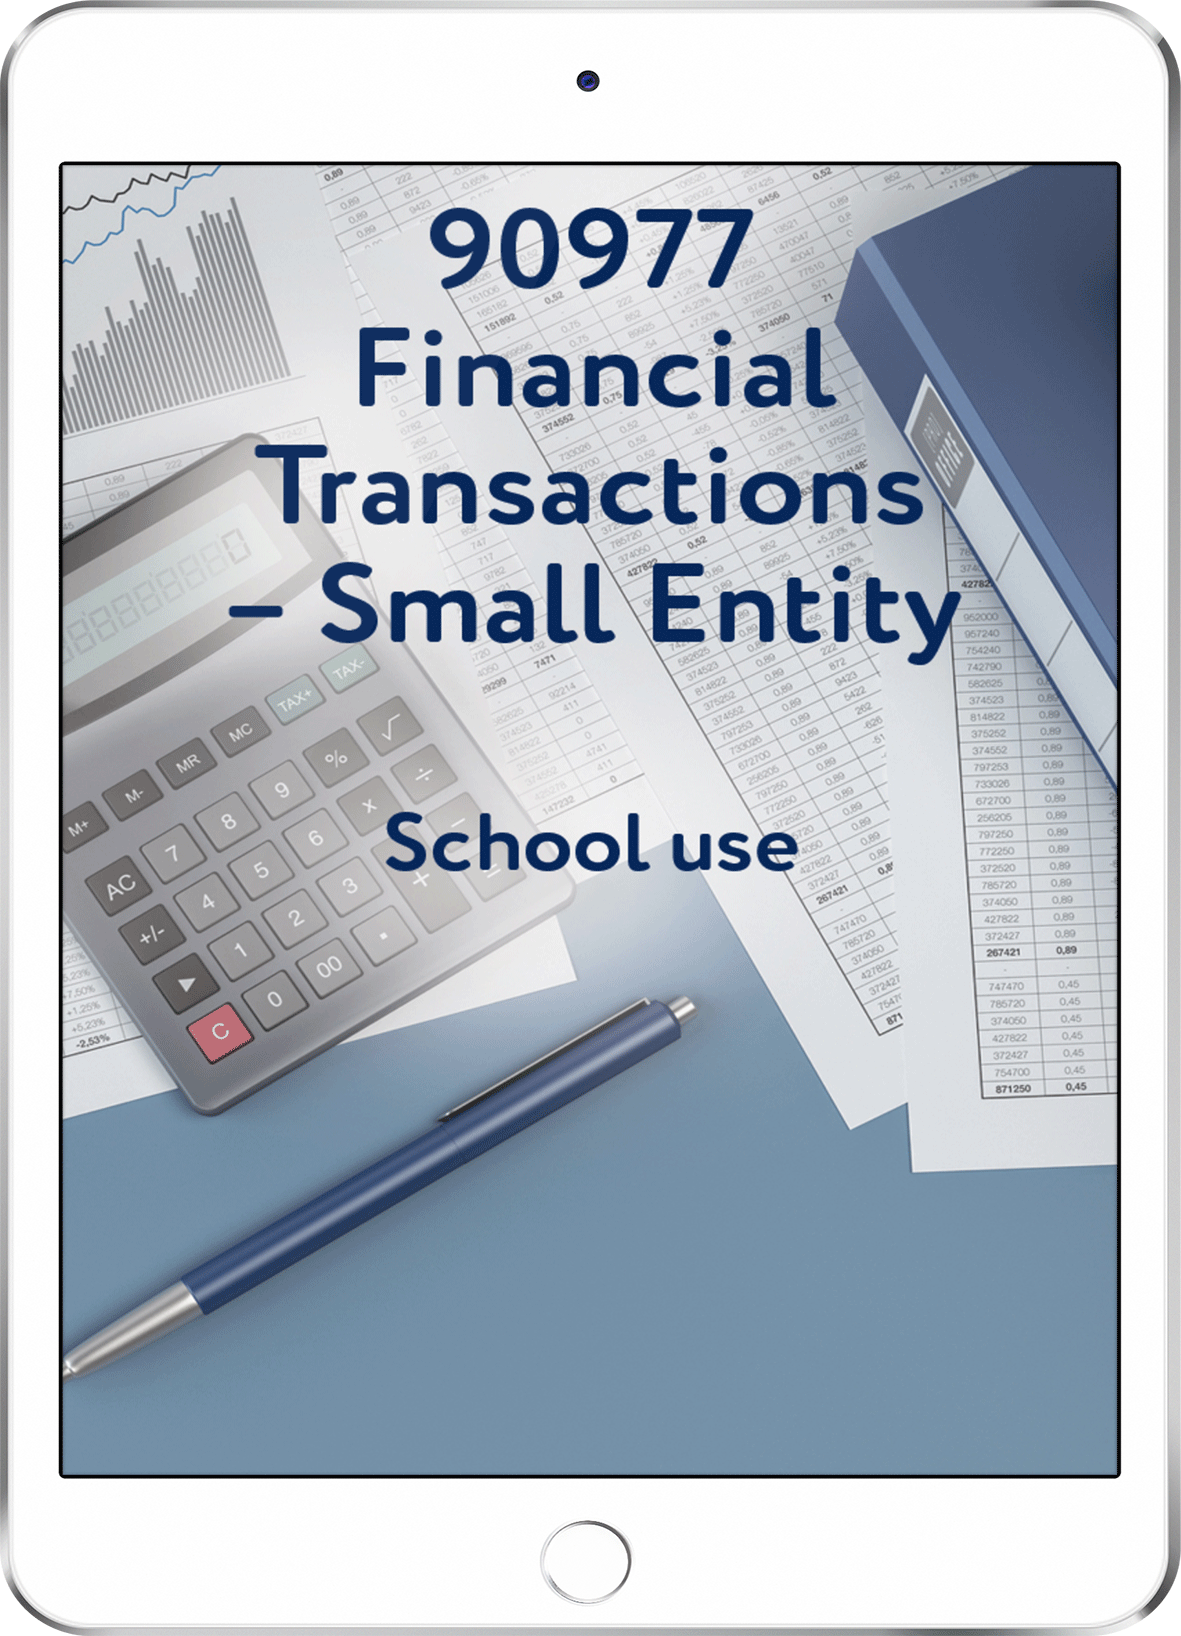 90977 Financial Transactions - Small Entity - School Use